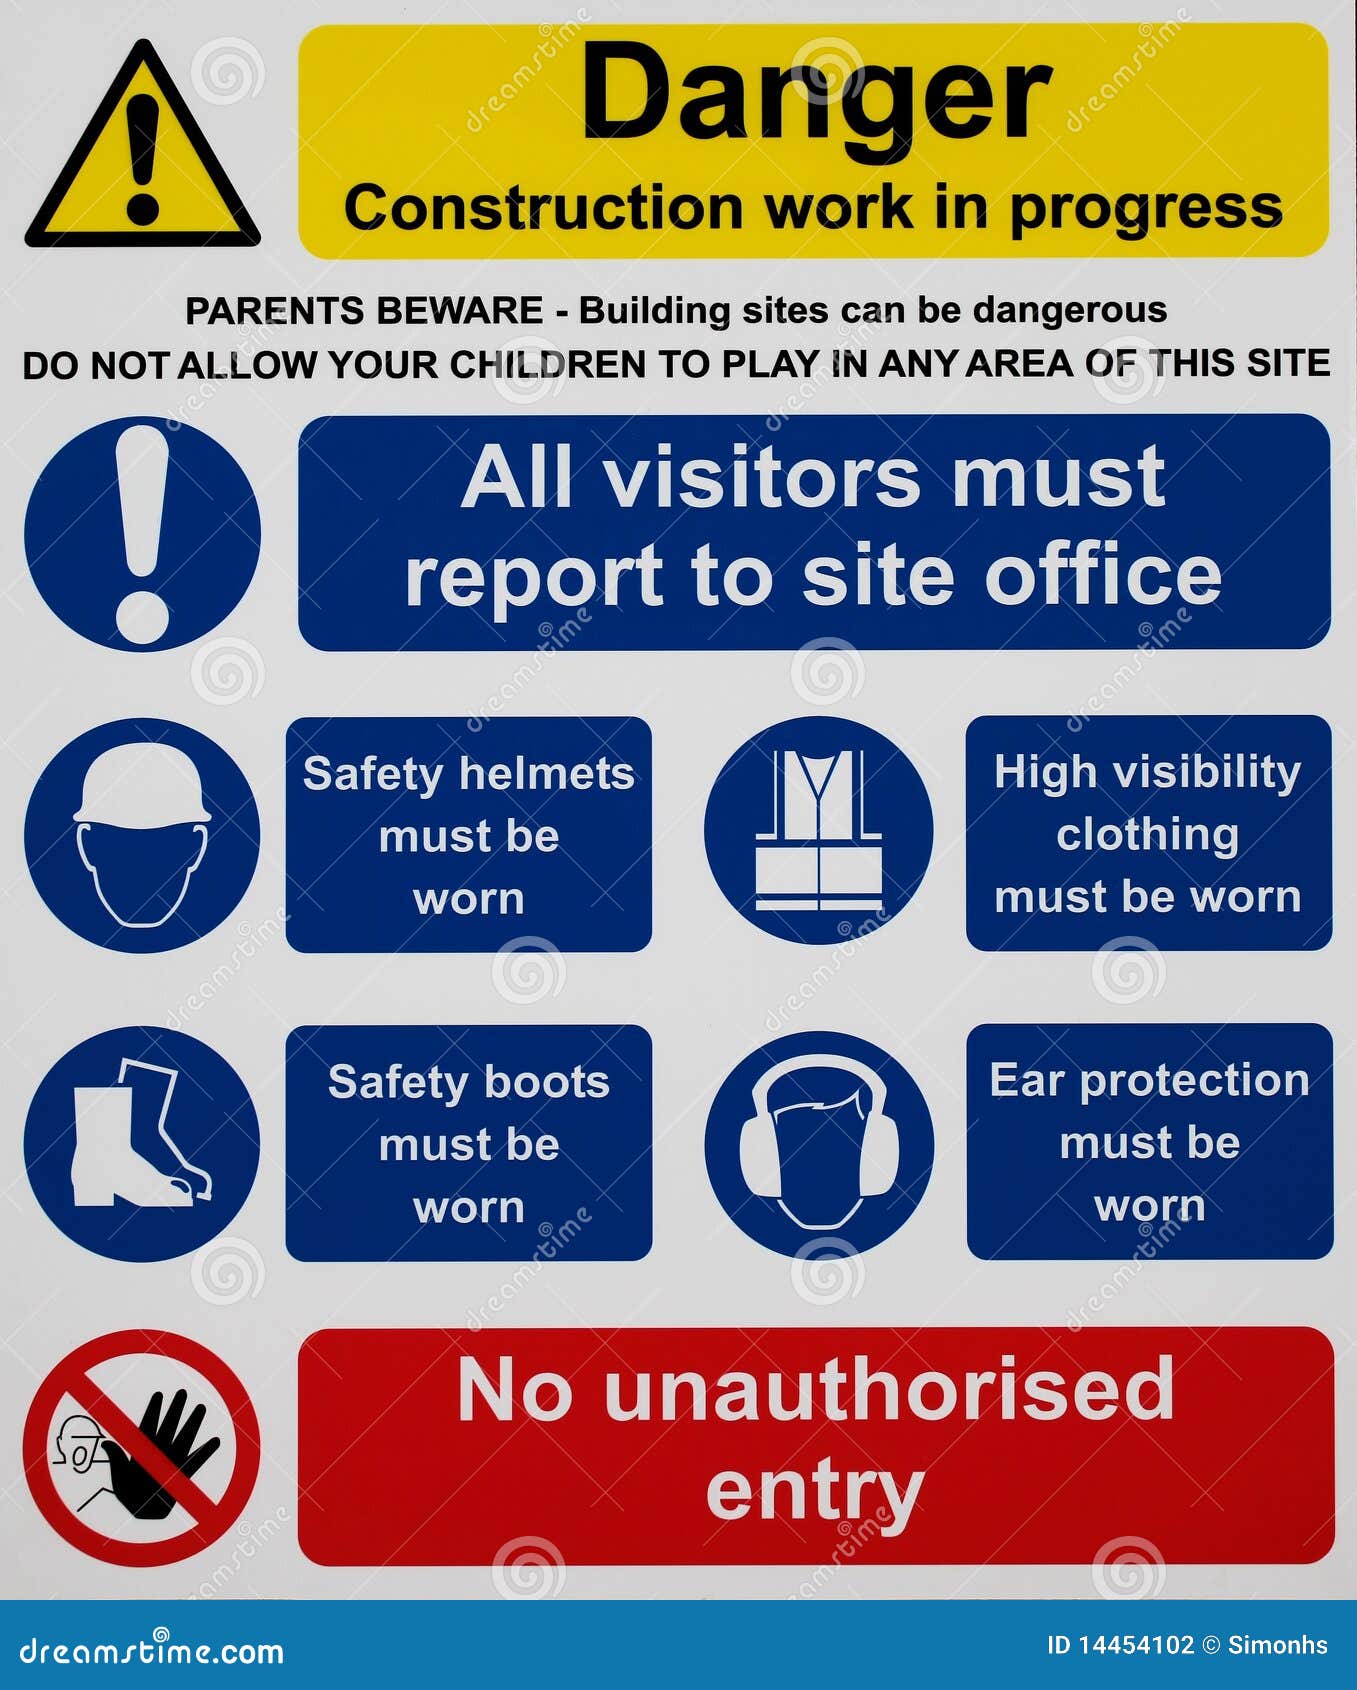 construction-site-safety-sign-14454102.j